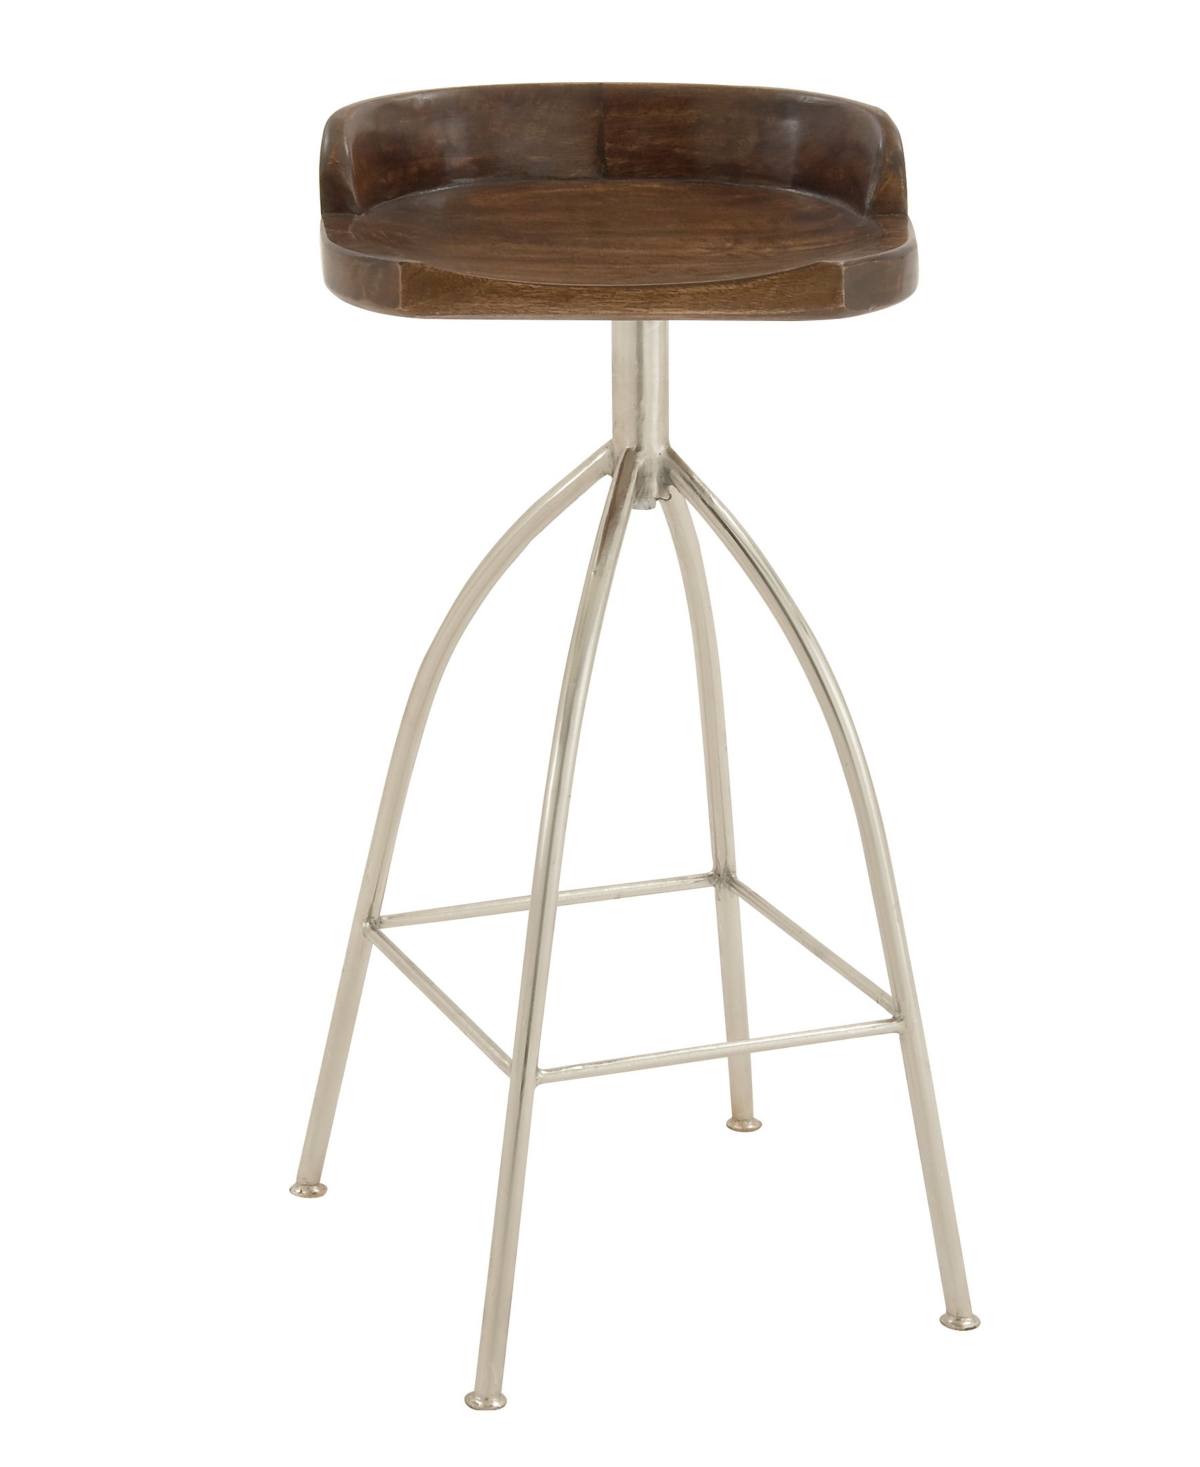 Shop Rosemary Lane Iron And Wood Contemporary Bar Stool In Dark Brown